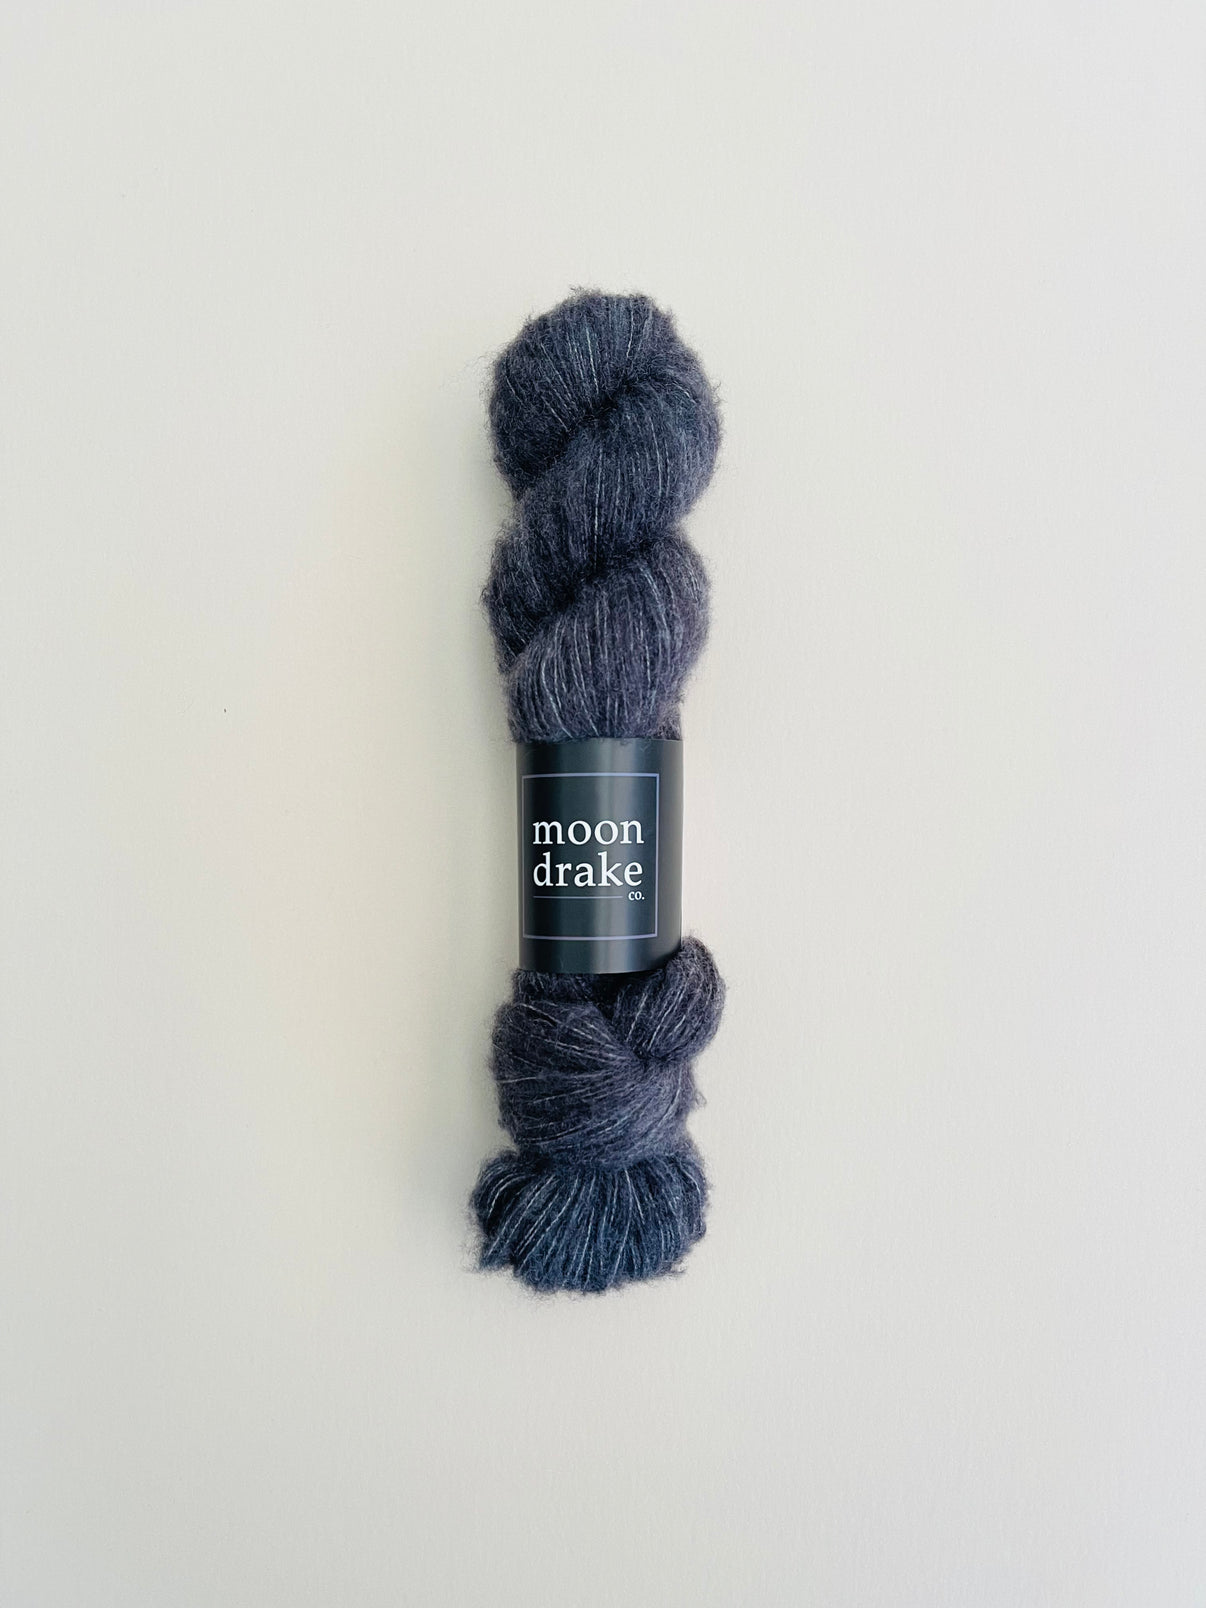 A deep cool grey skein of brushed cashmere fingering weight yarn.